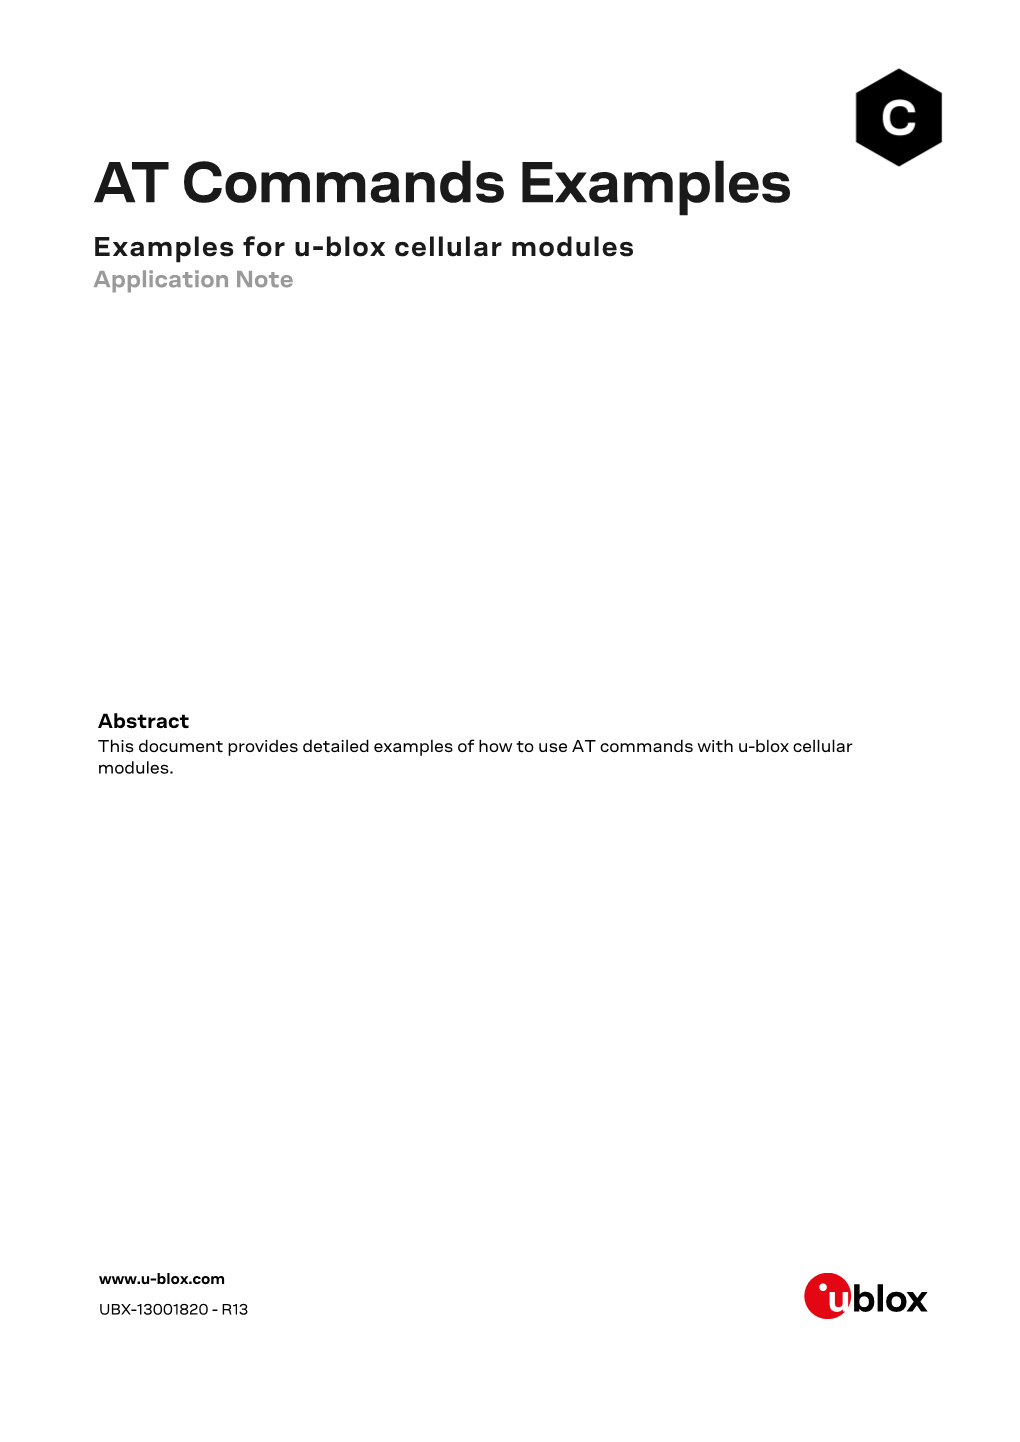 AT Commands Examples Examples for U-Blox Cellular Modules Application Note